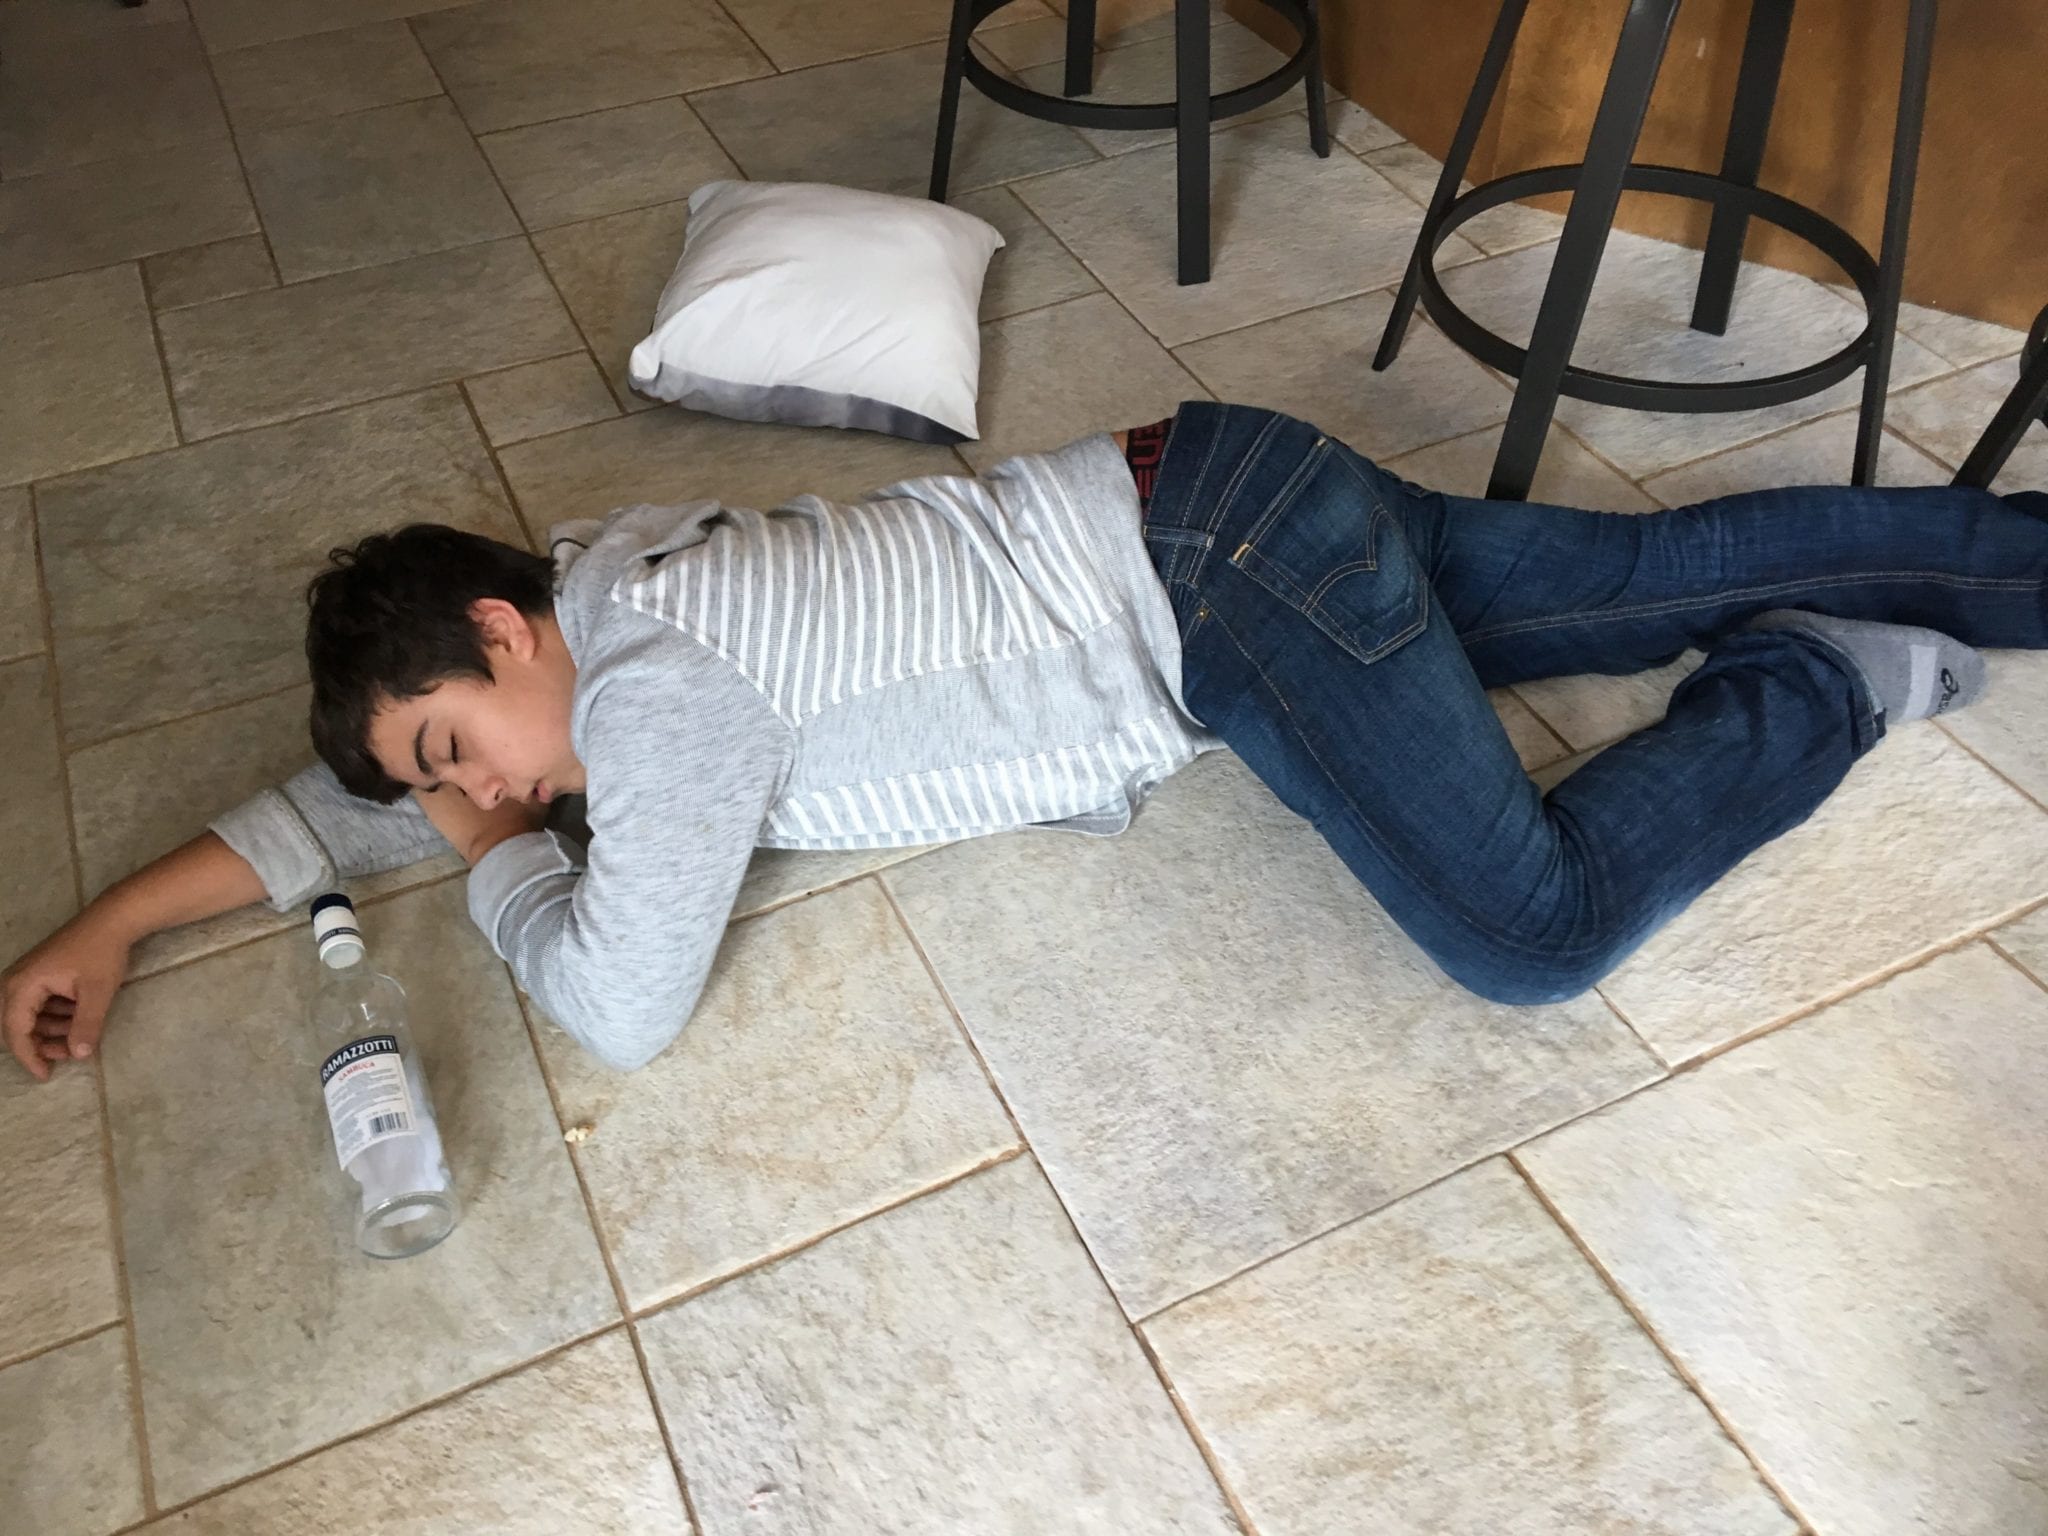 Recovery position allows vomit to drain